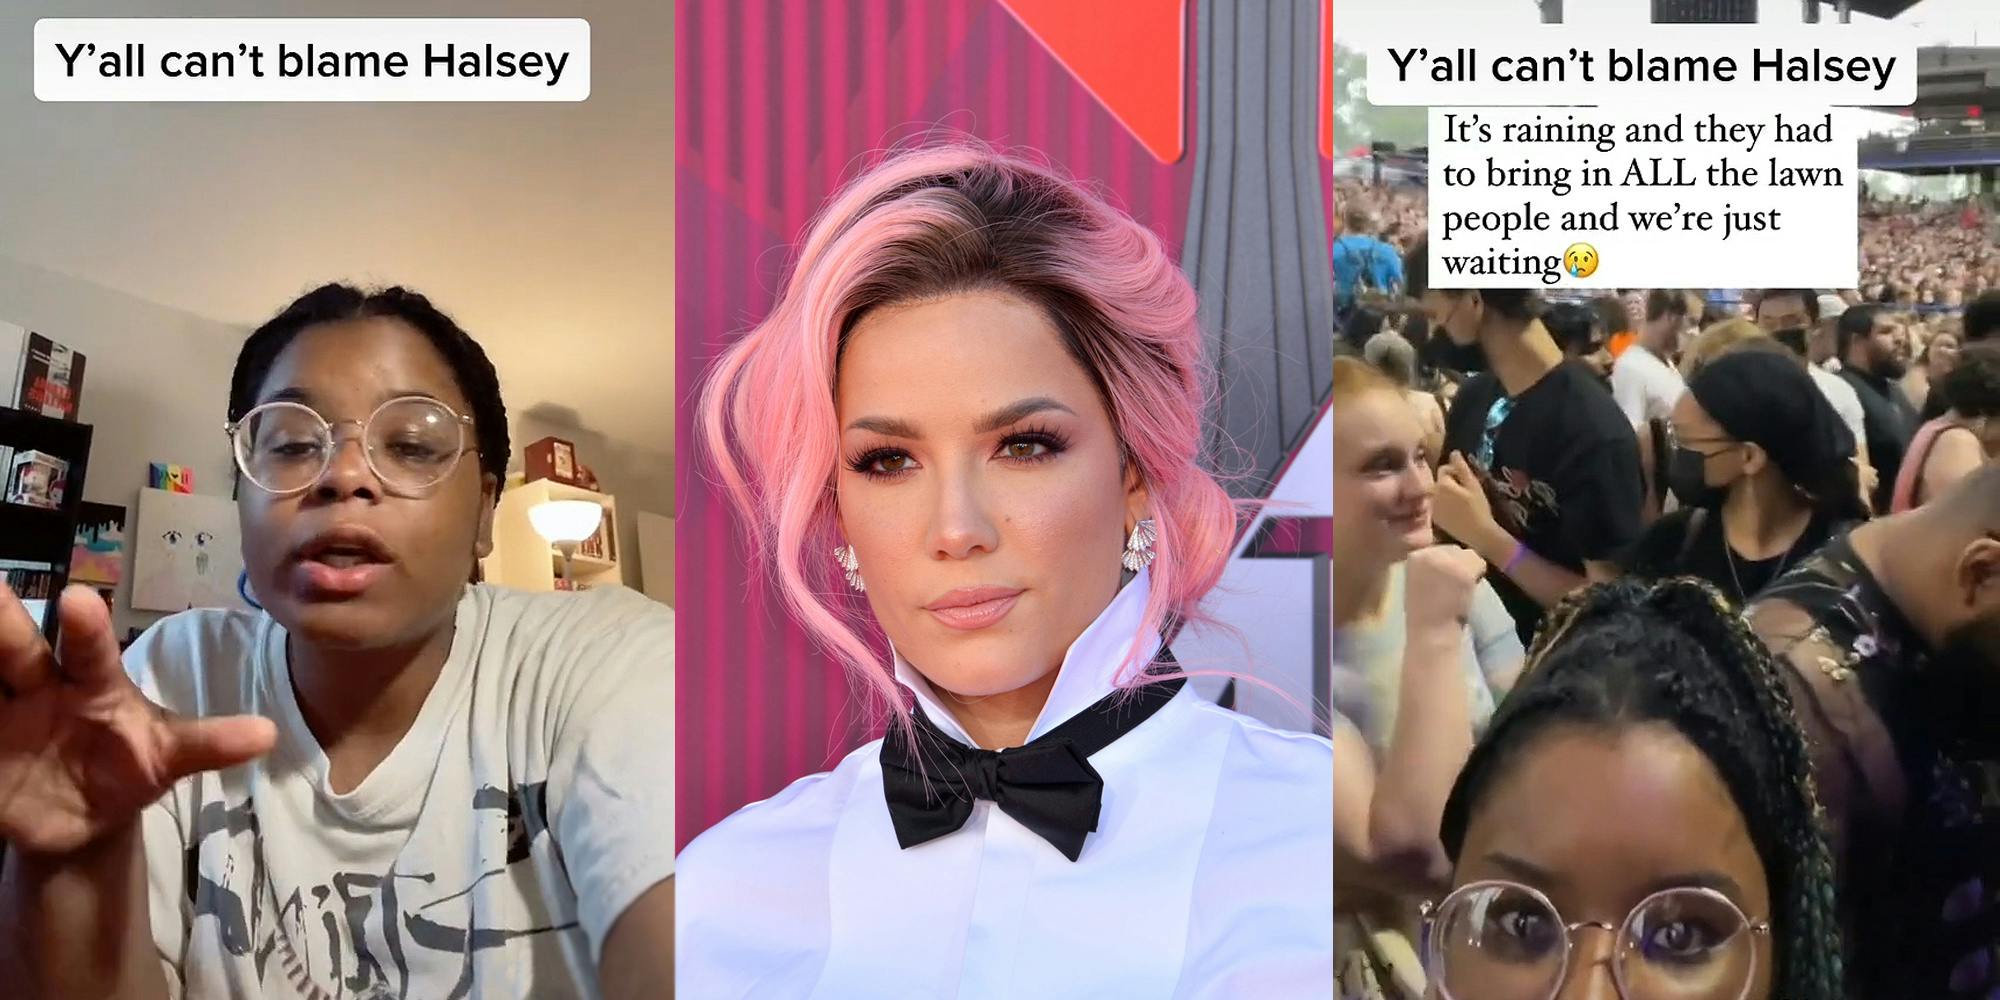 woman speaking caption "Y'all can't blame Halsey" (l) Halsey on pink stripped background (c) woman greenscreen tiktok caption "Y'all can't blame Halsey" "It's raining and they had to bring in ALL the lawn people and we're just waiting" (r)